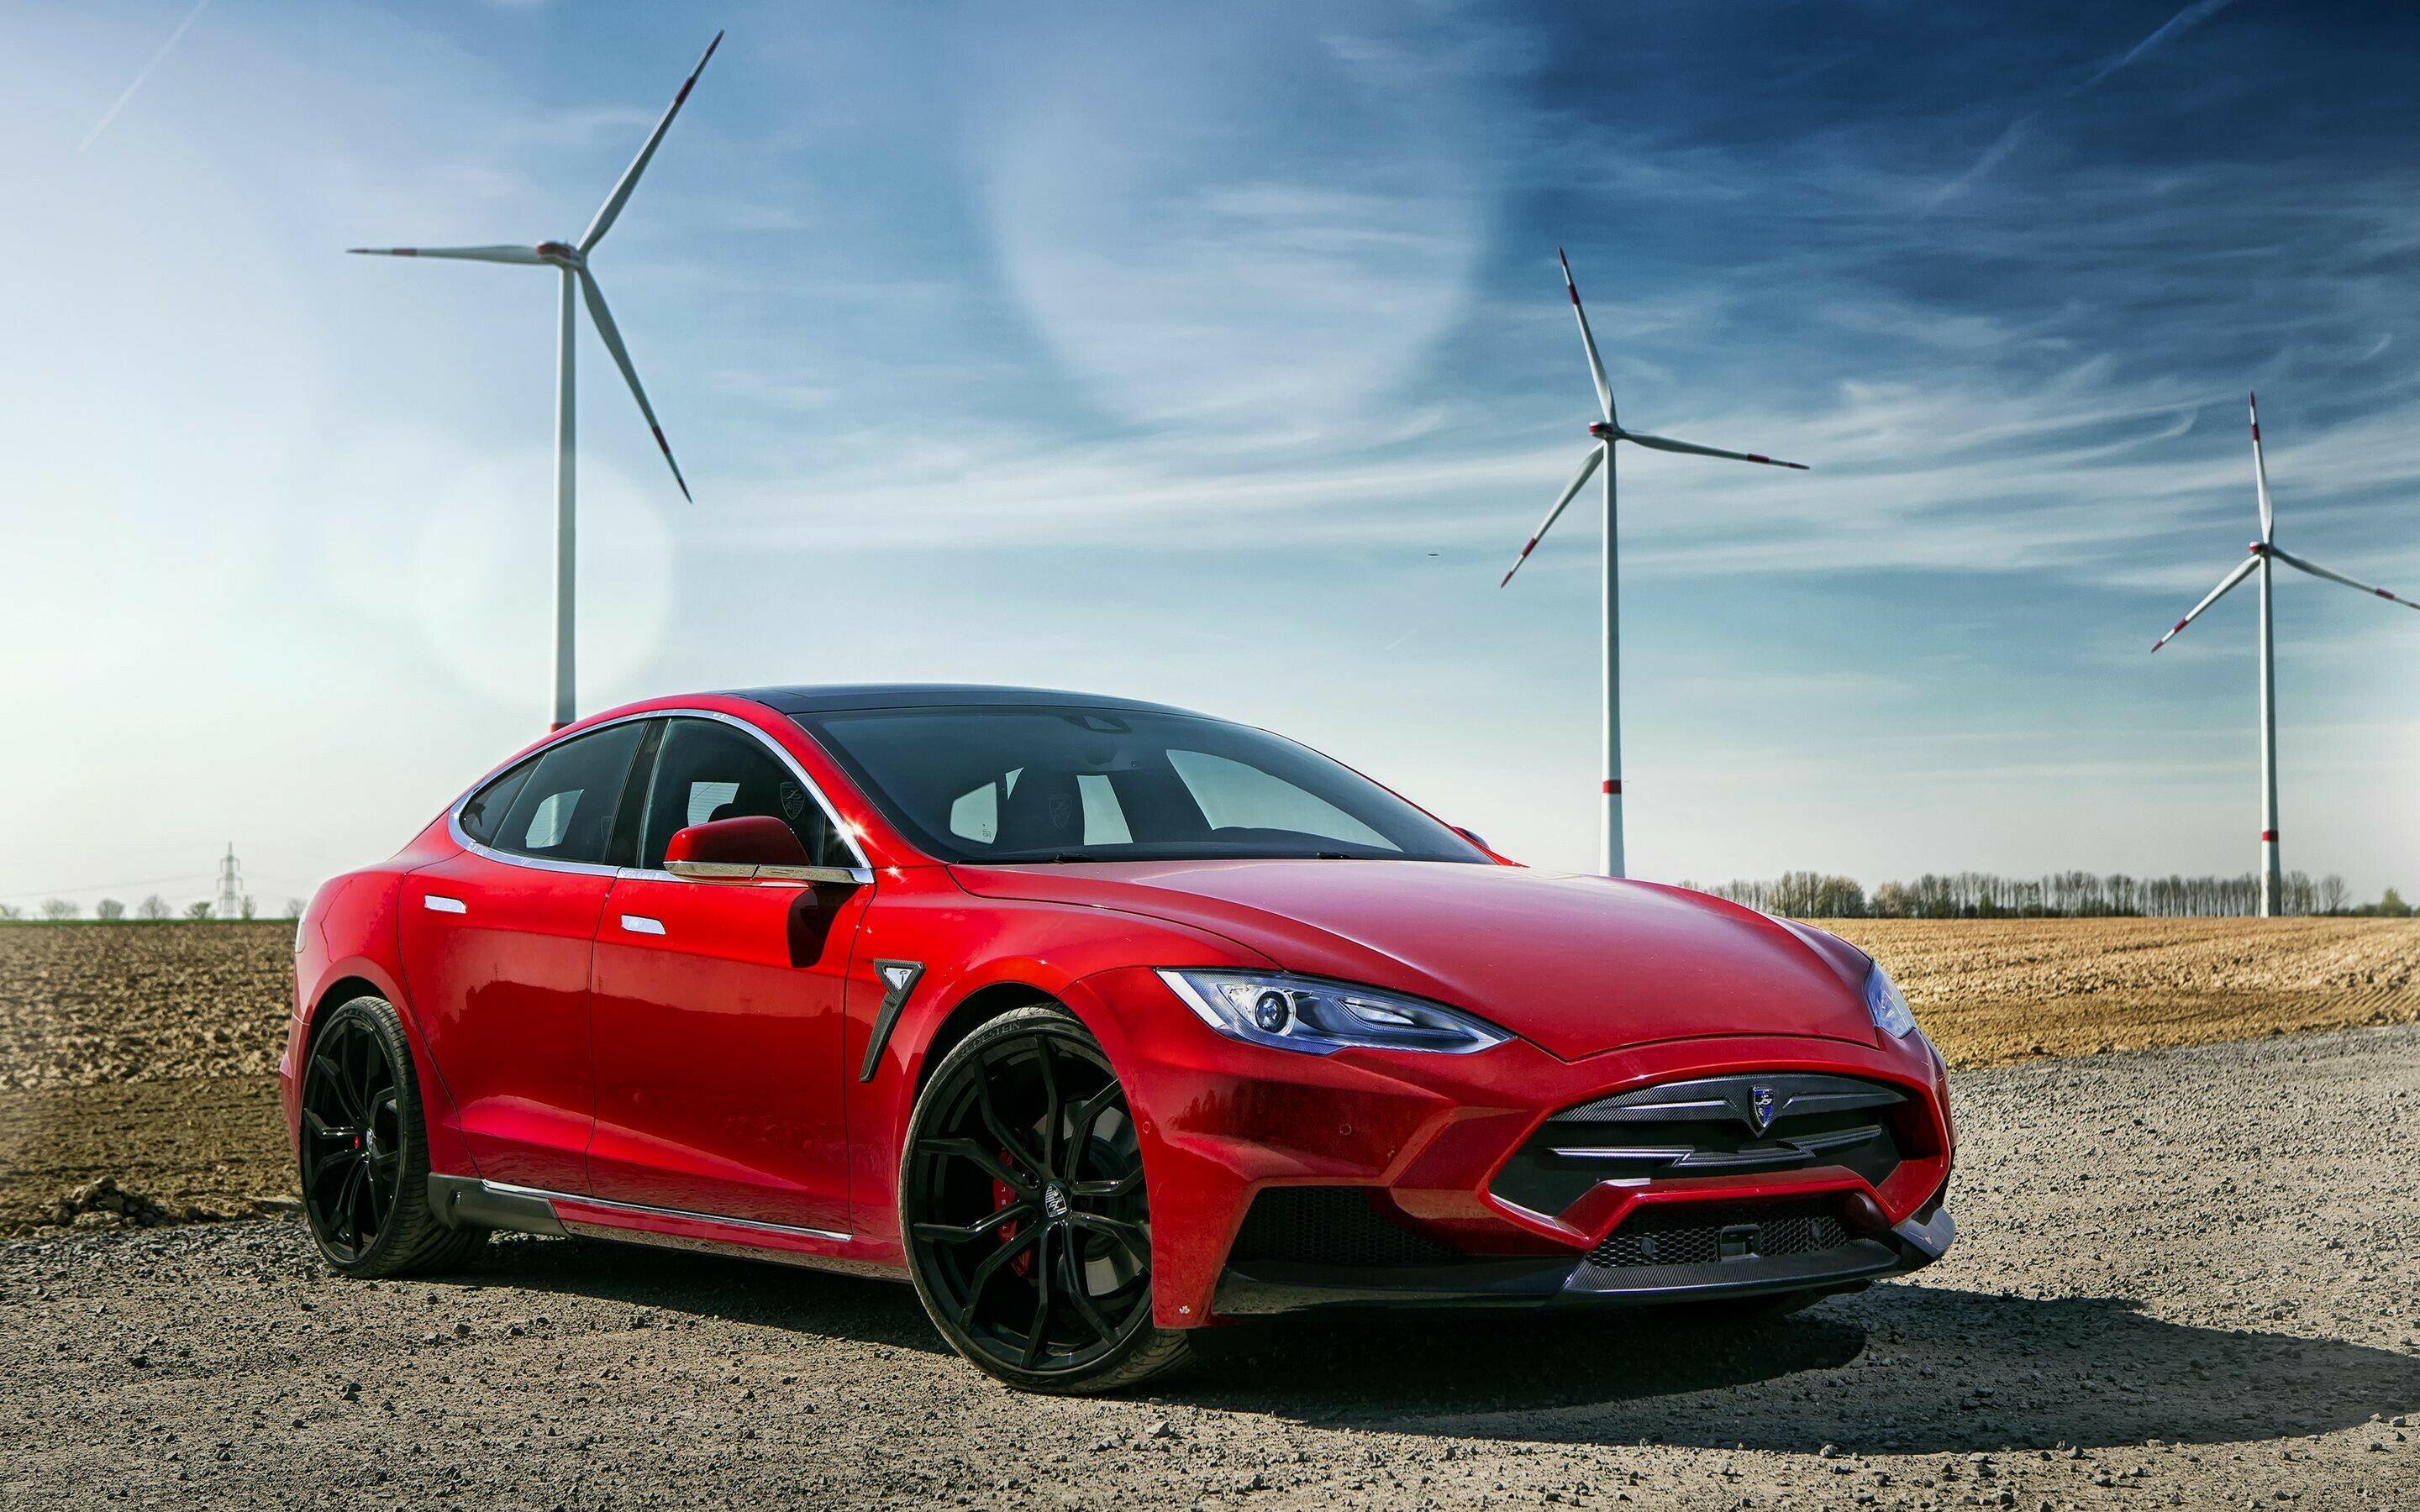 Tesla Model S: An all-electric executive saloon that combines amazing performance with zero tailpipe emissions. 2880x1800 HD Wallpaper.